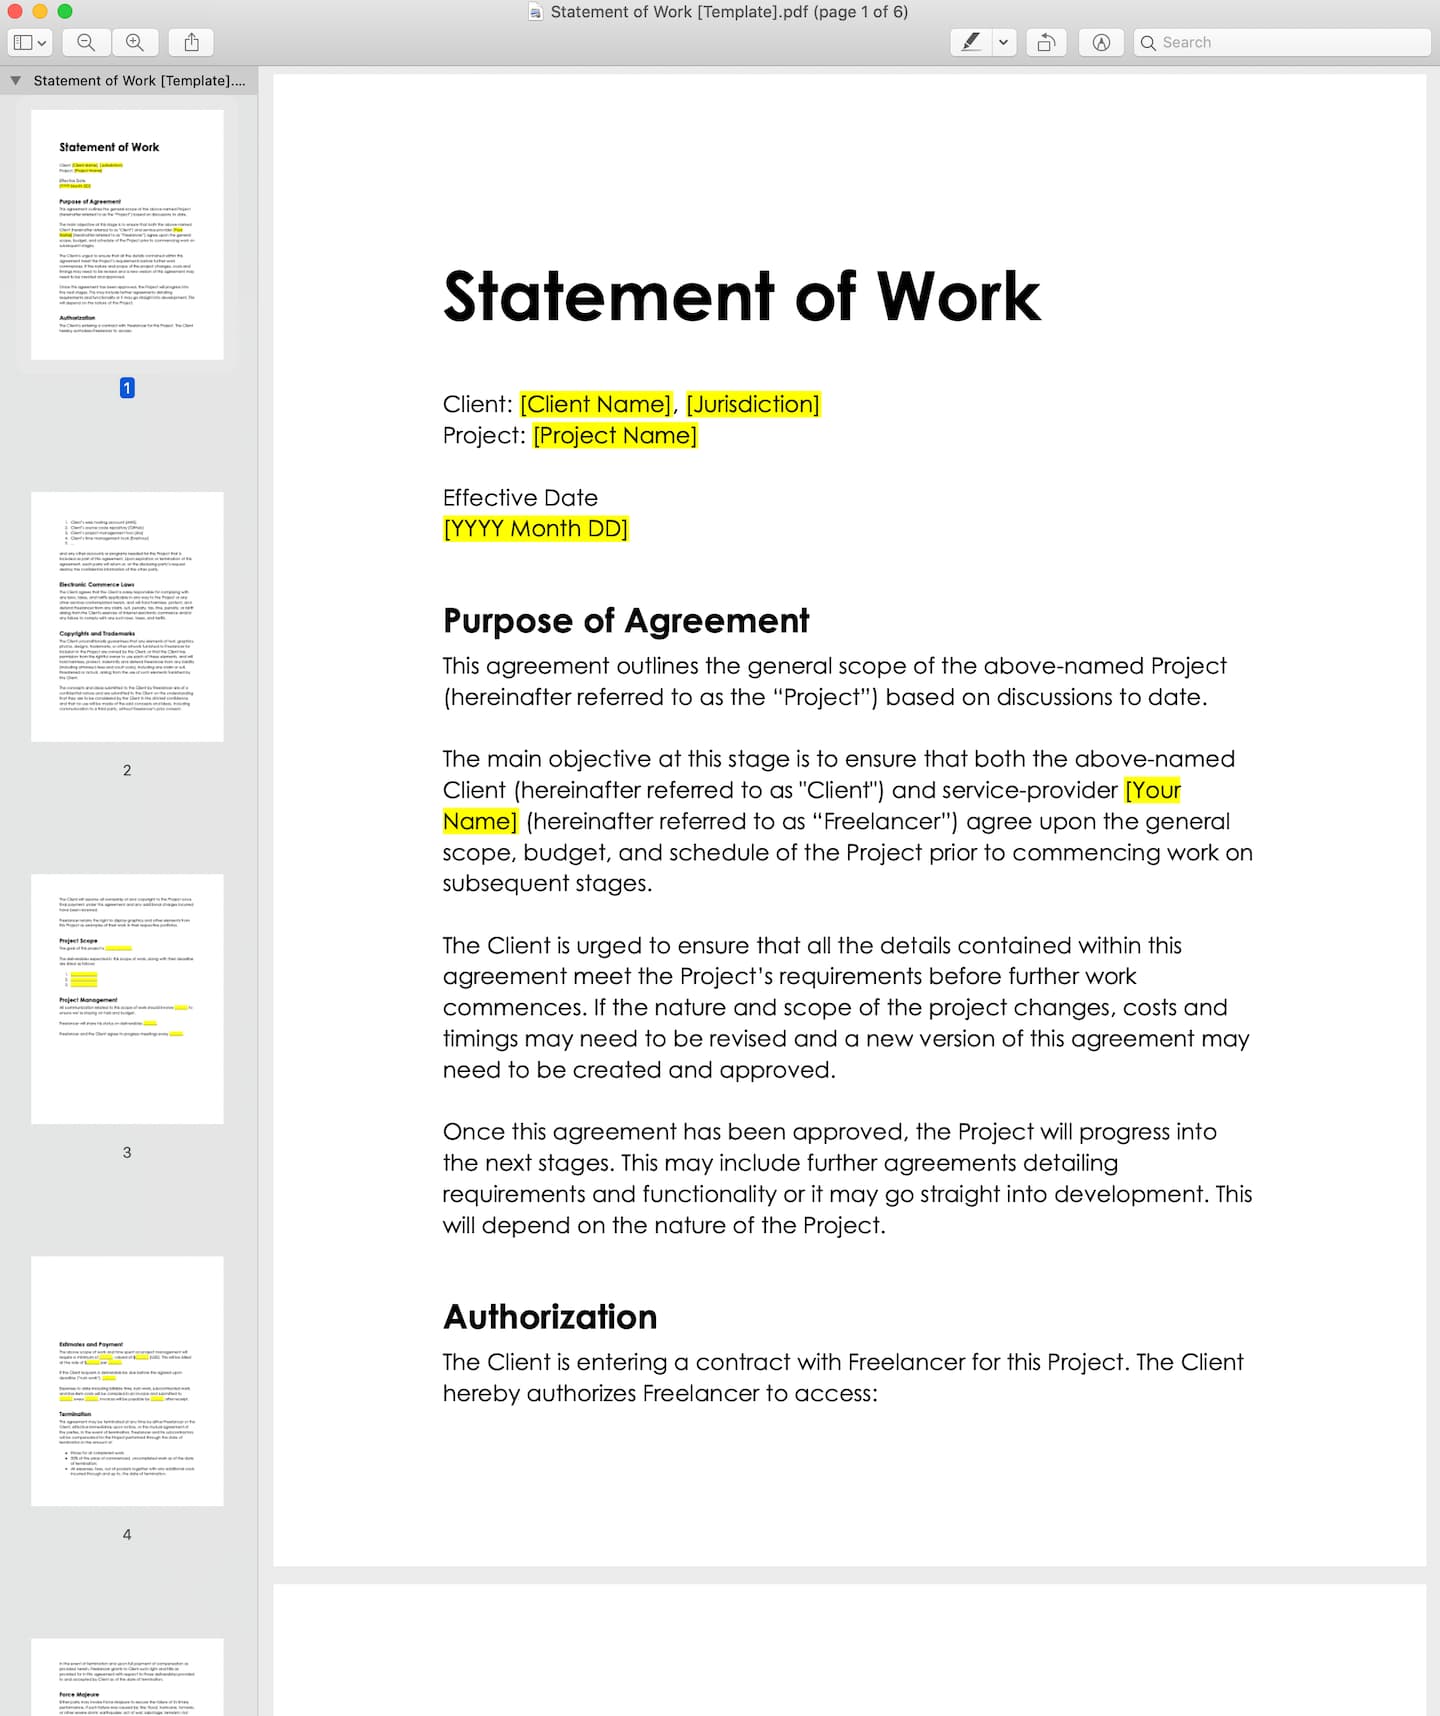 Statement Of Work Template, Example and Definition